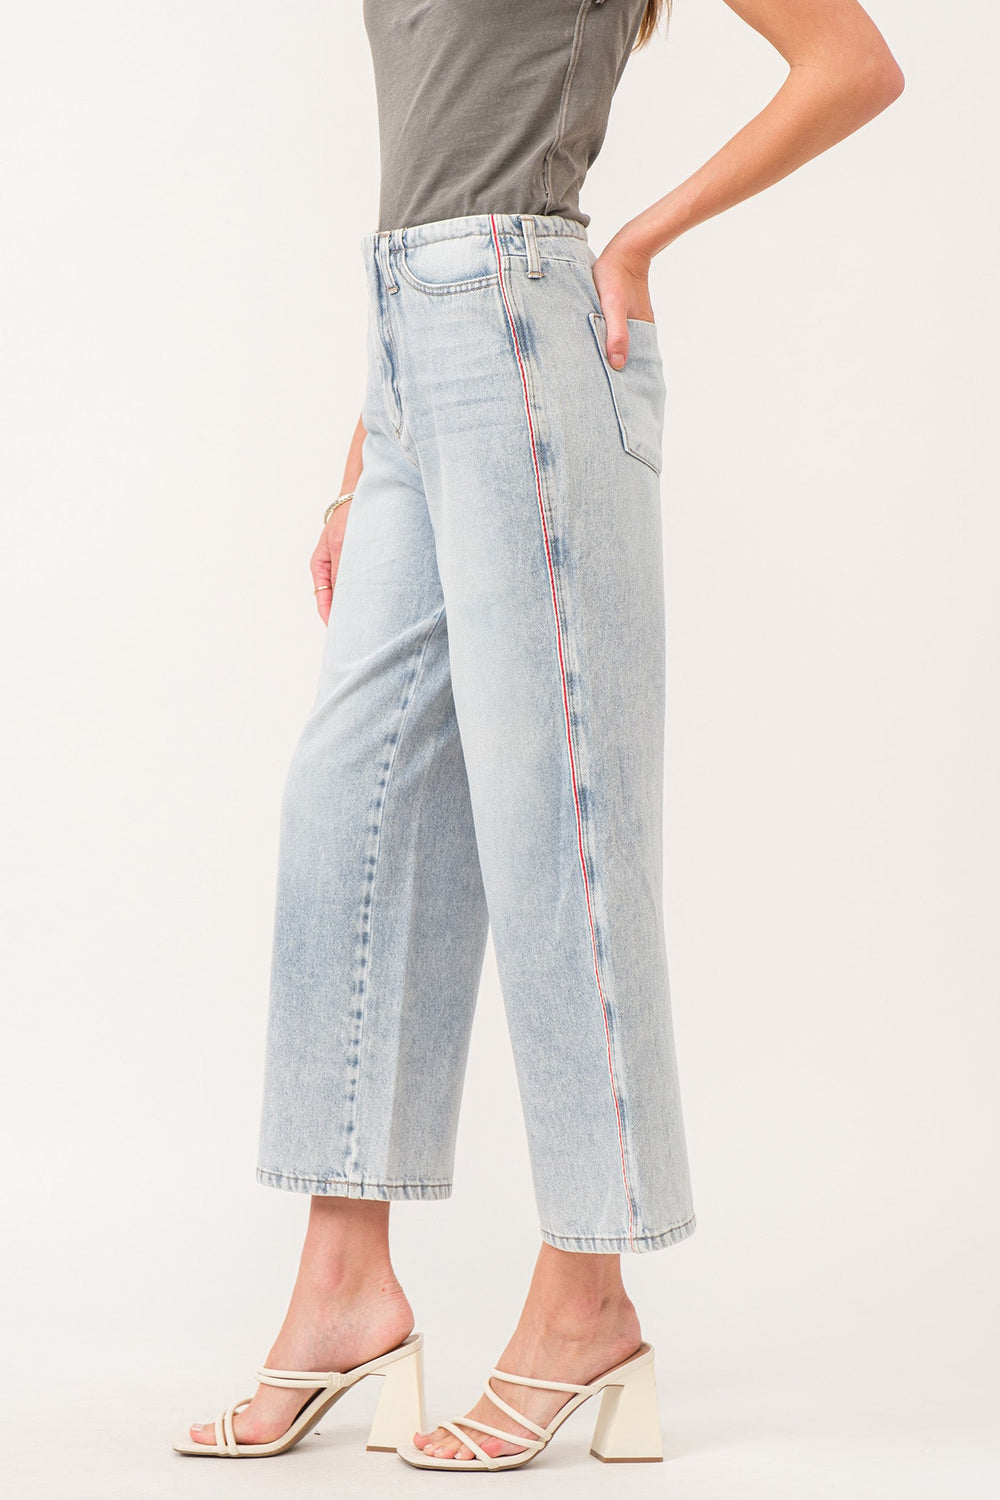 image of a female model wearing a POLLY SUPER HIGH RISE CROPPED LOOSE STRAIGHT JEANS NAPLES DEAR JOHN DENIM 